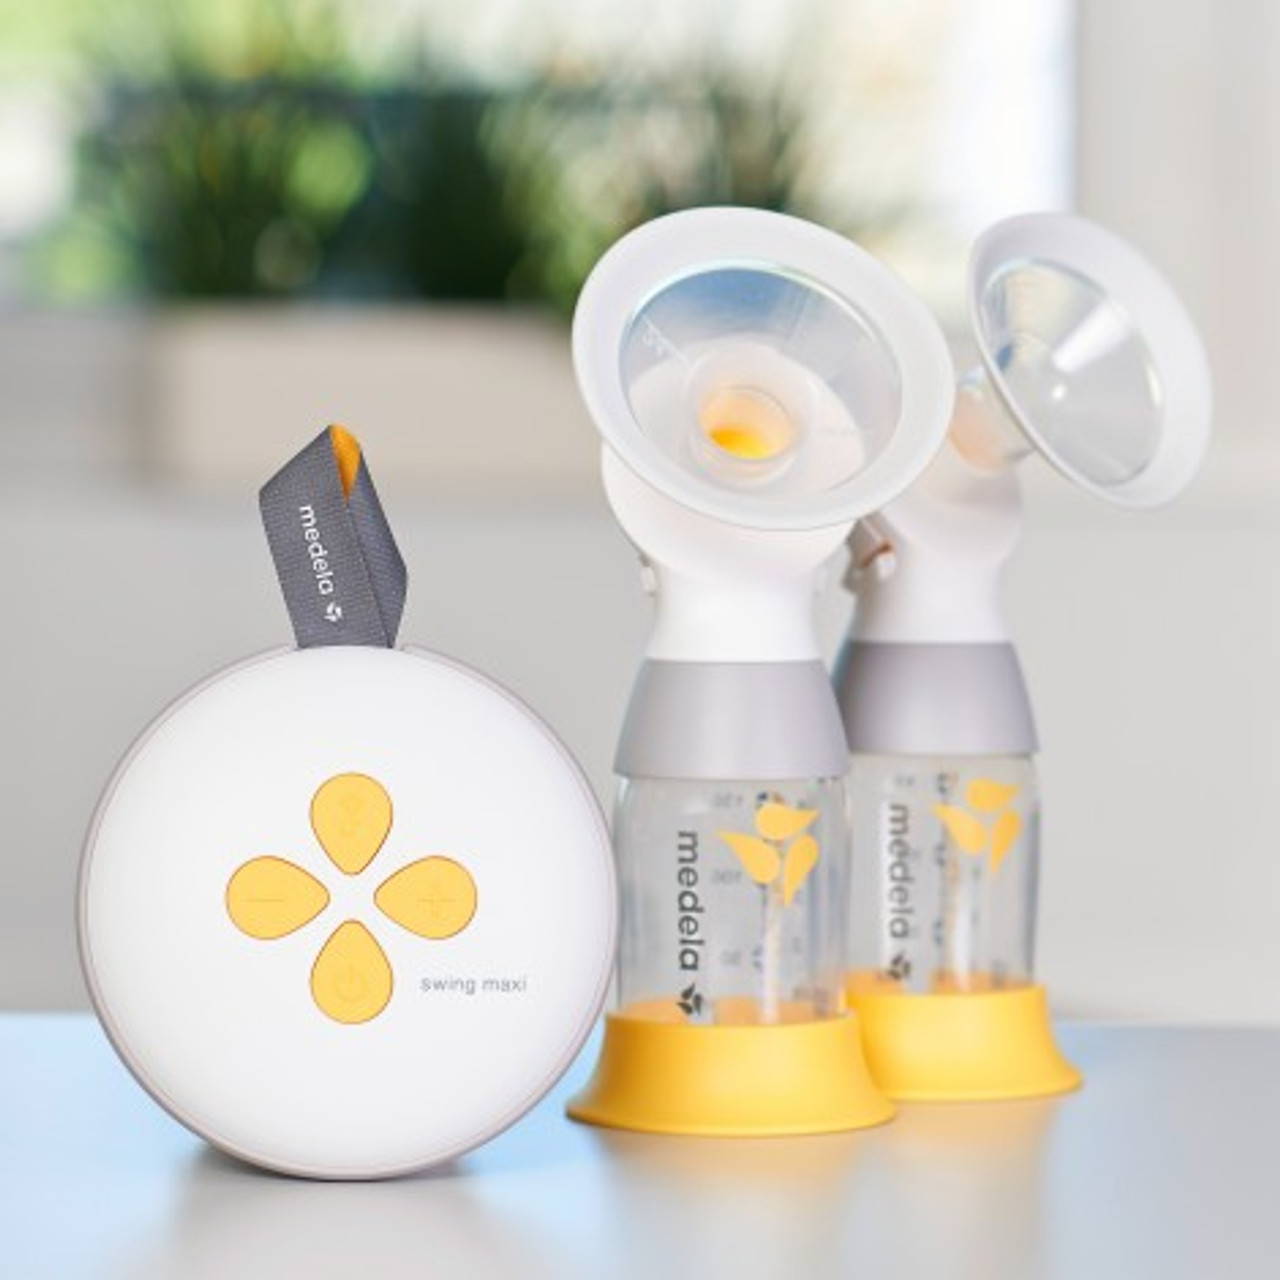 MEDELA SWING MAXI VS. FREESTYLE HANDS-FREE BREAST PUMP - Baby Square